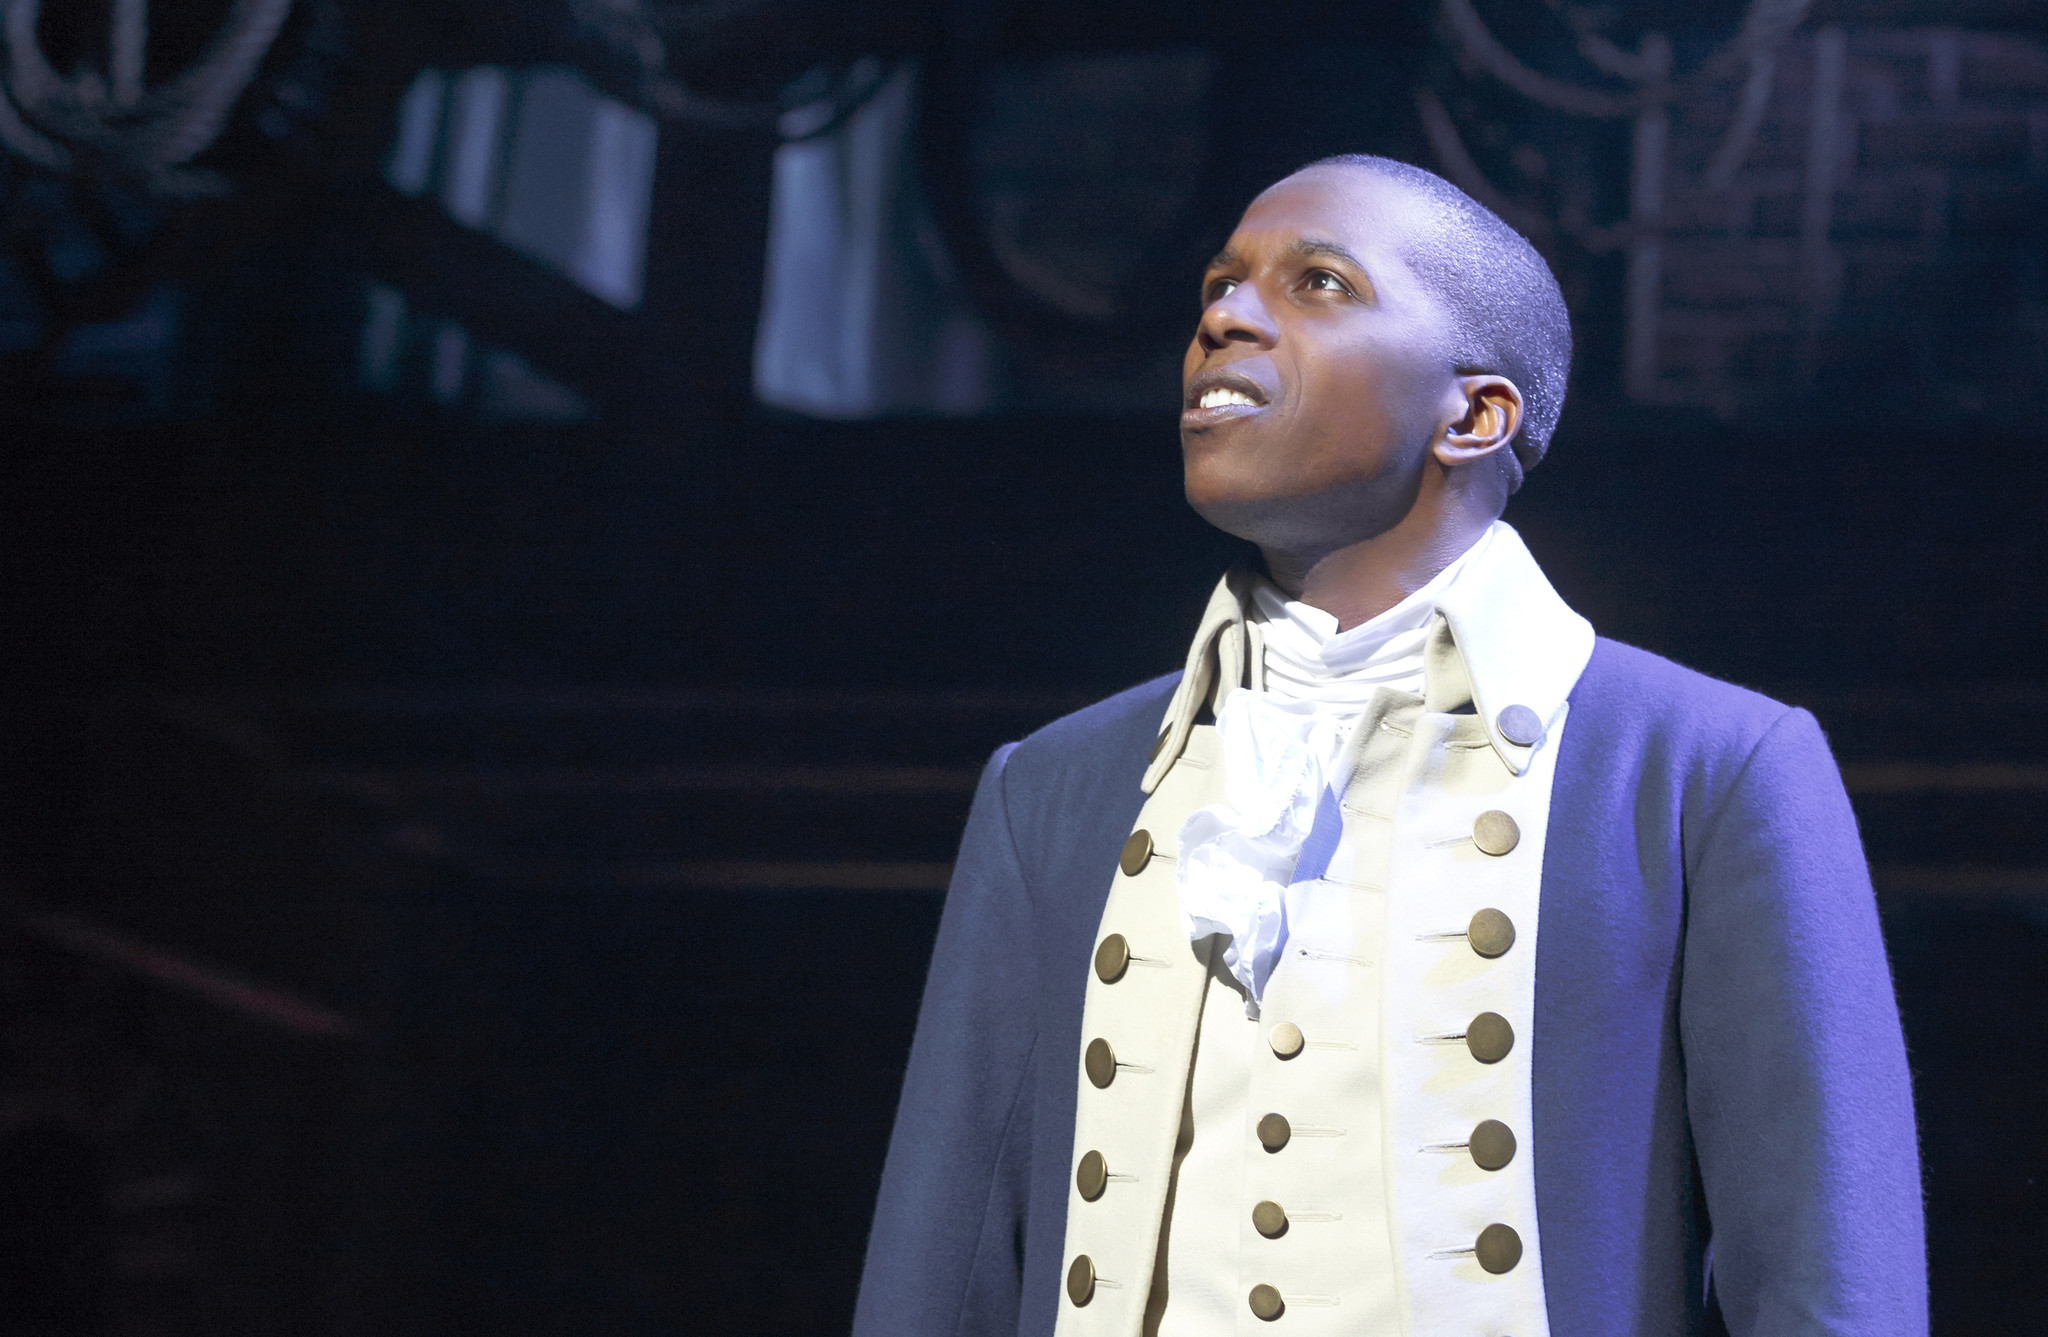 Leslie Odom Jr., nominated for lead actor in a musical for playing Aaron Burr in "Hamilton." (Joan Marcus / Richard Rogers Theatre)